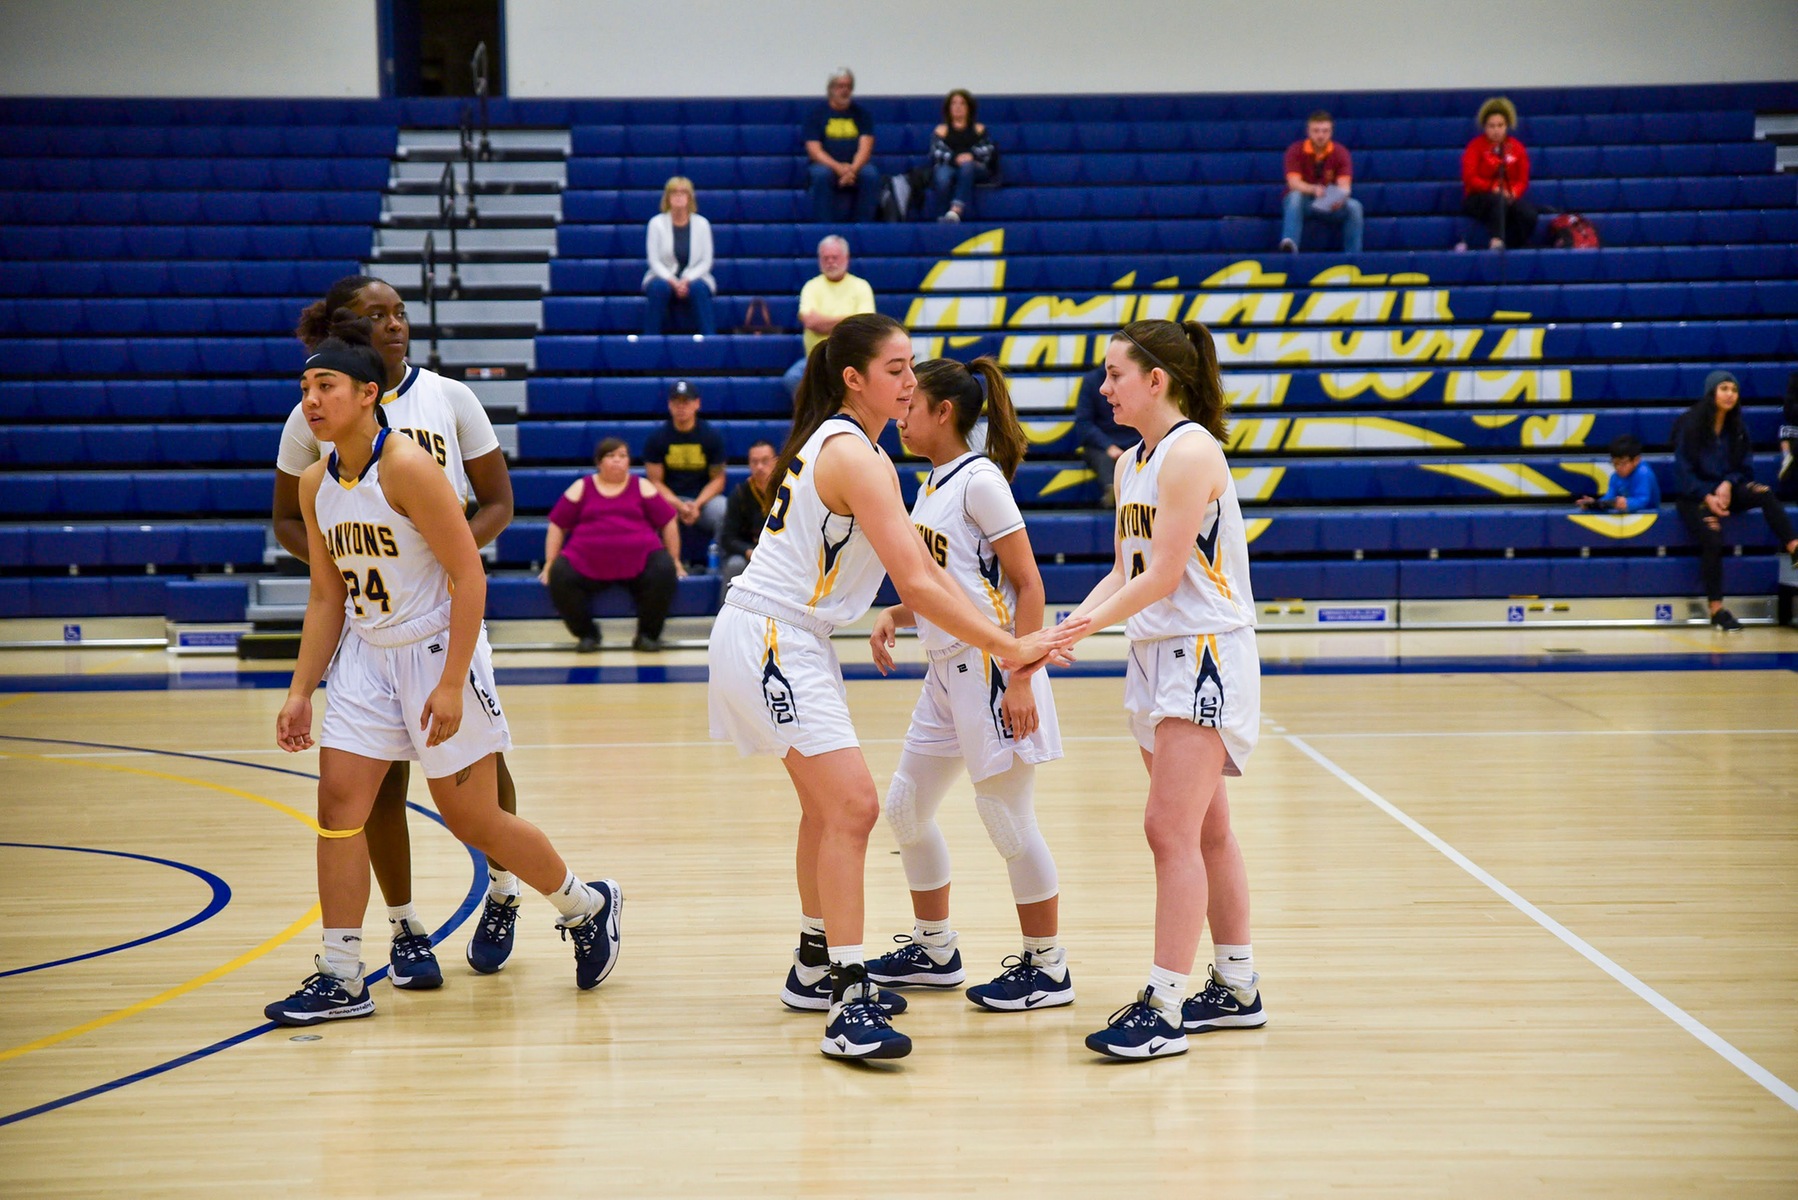 COC women's basketball players Cristian Patron and McKenzie Stoehr during the 2019-20 season.